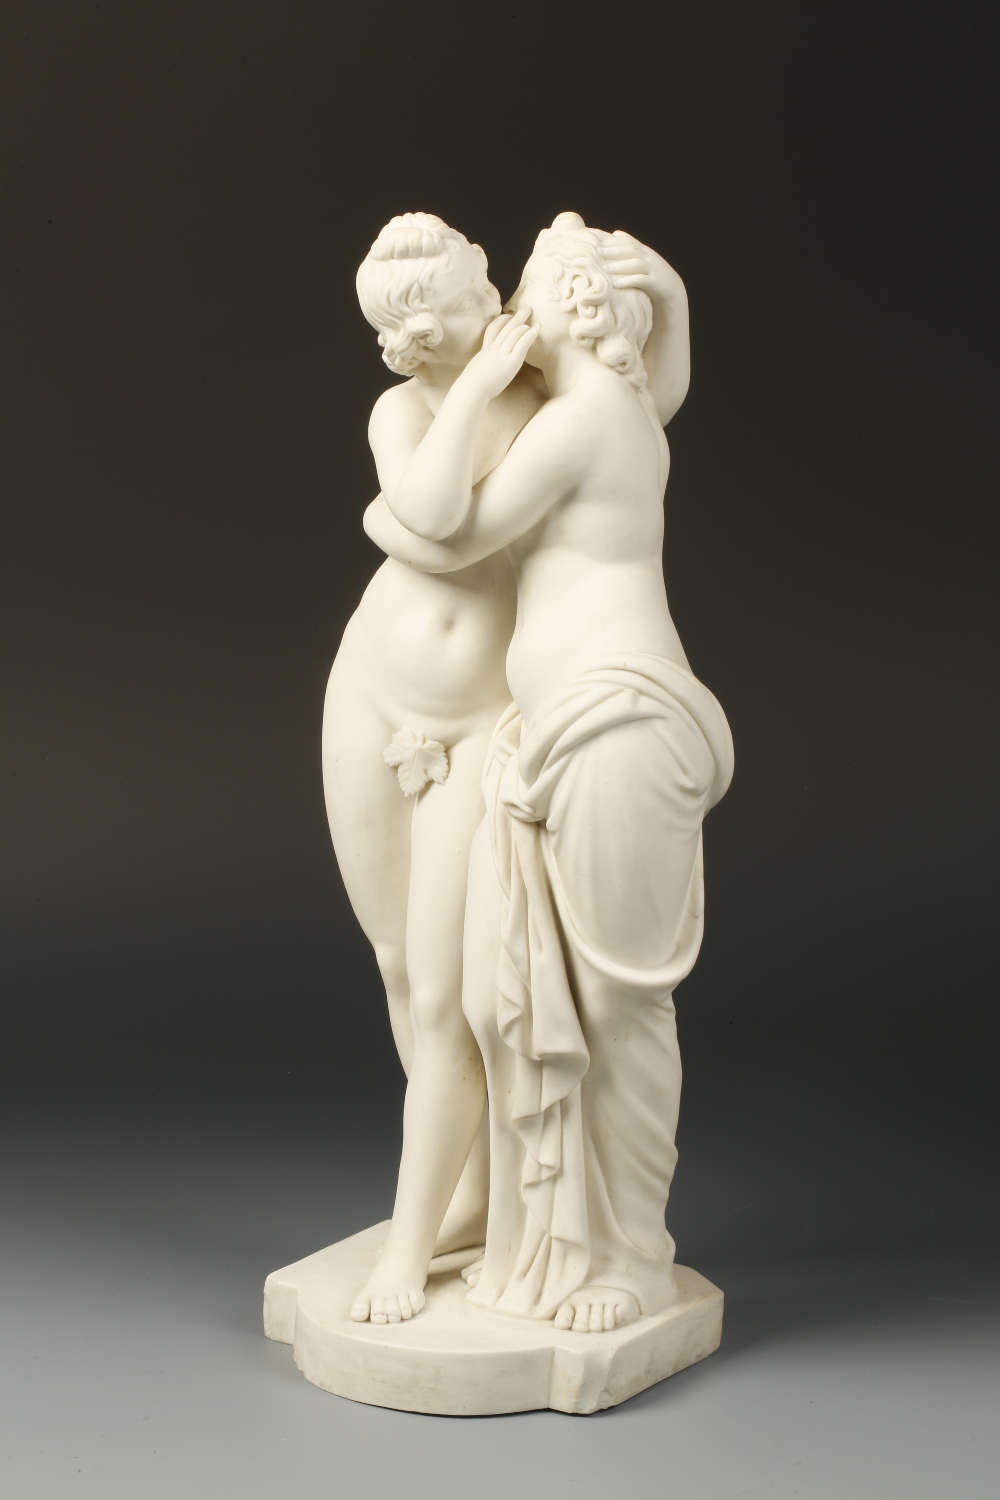 A MINTONS PARIAN WARE GROUP OF CUPID AND PSYCHE KISSING, on a cartouche-shaped base, inscribed "From